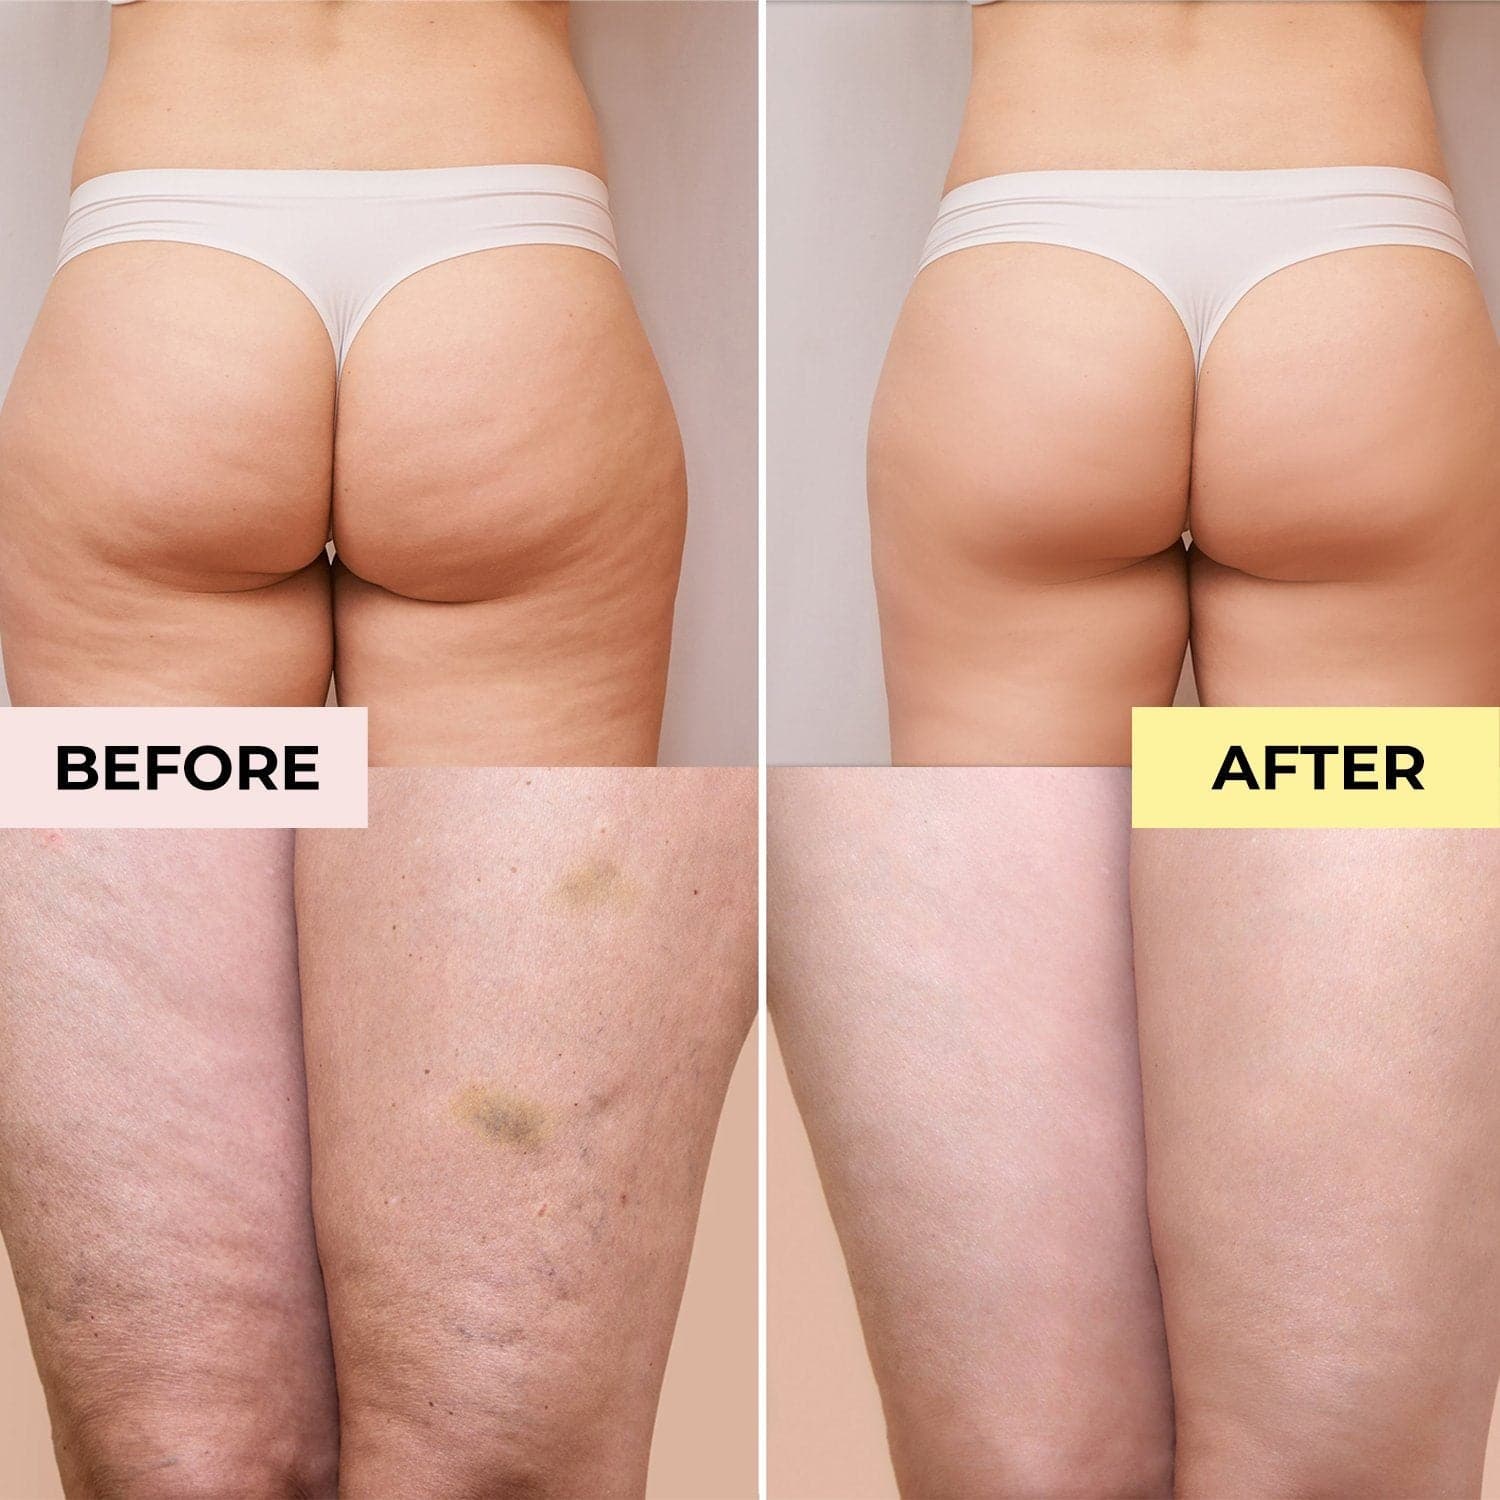 Anti-Cellulite Treatments: What's The Best Option For You?